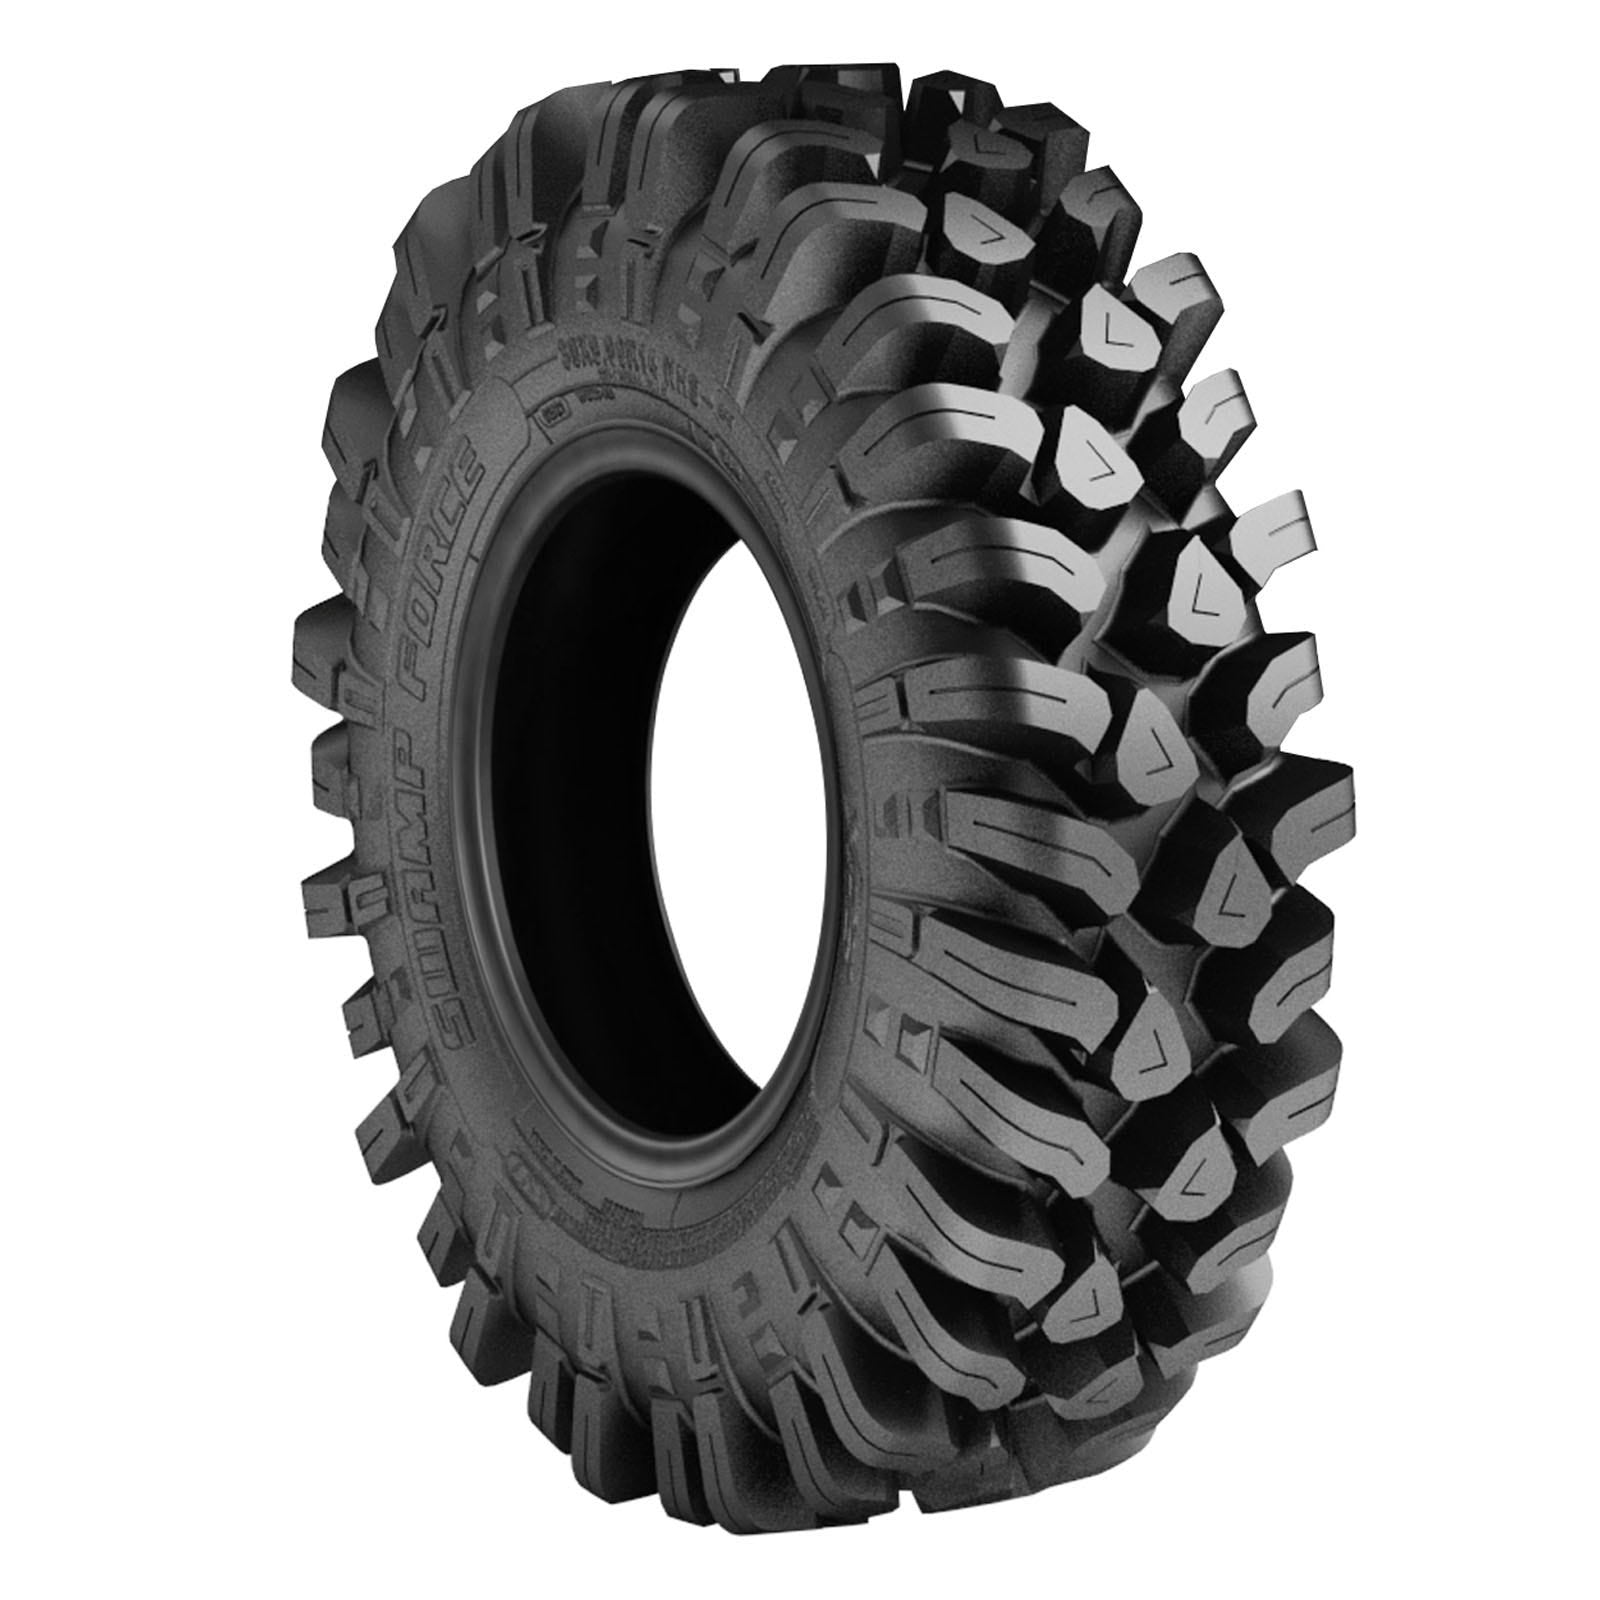 OEM Can-am XPS Swamp Force Tire-705503387